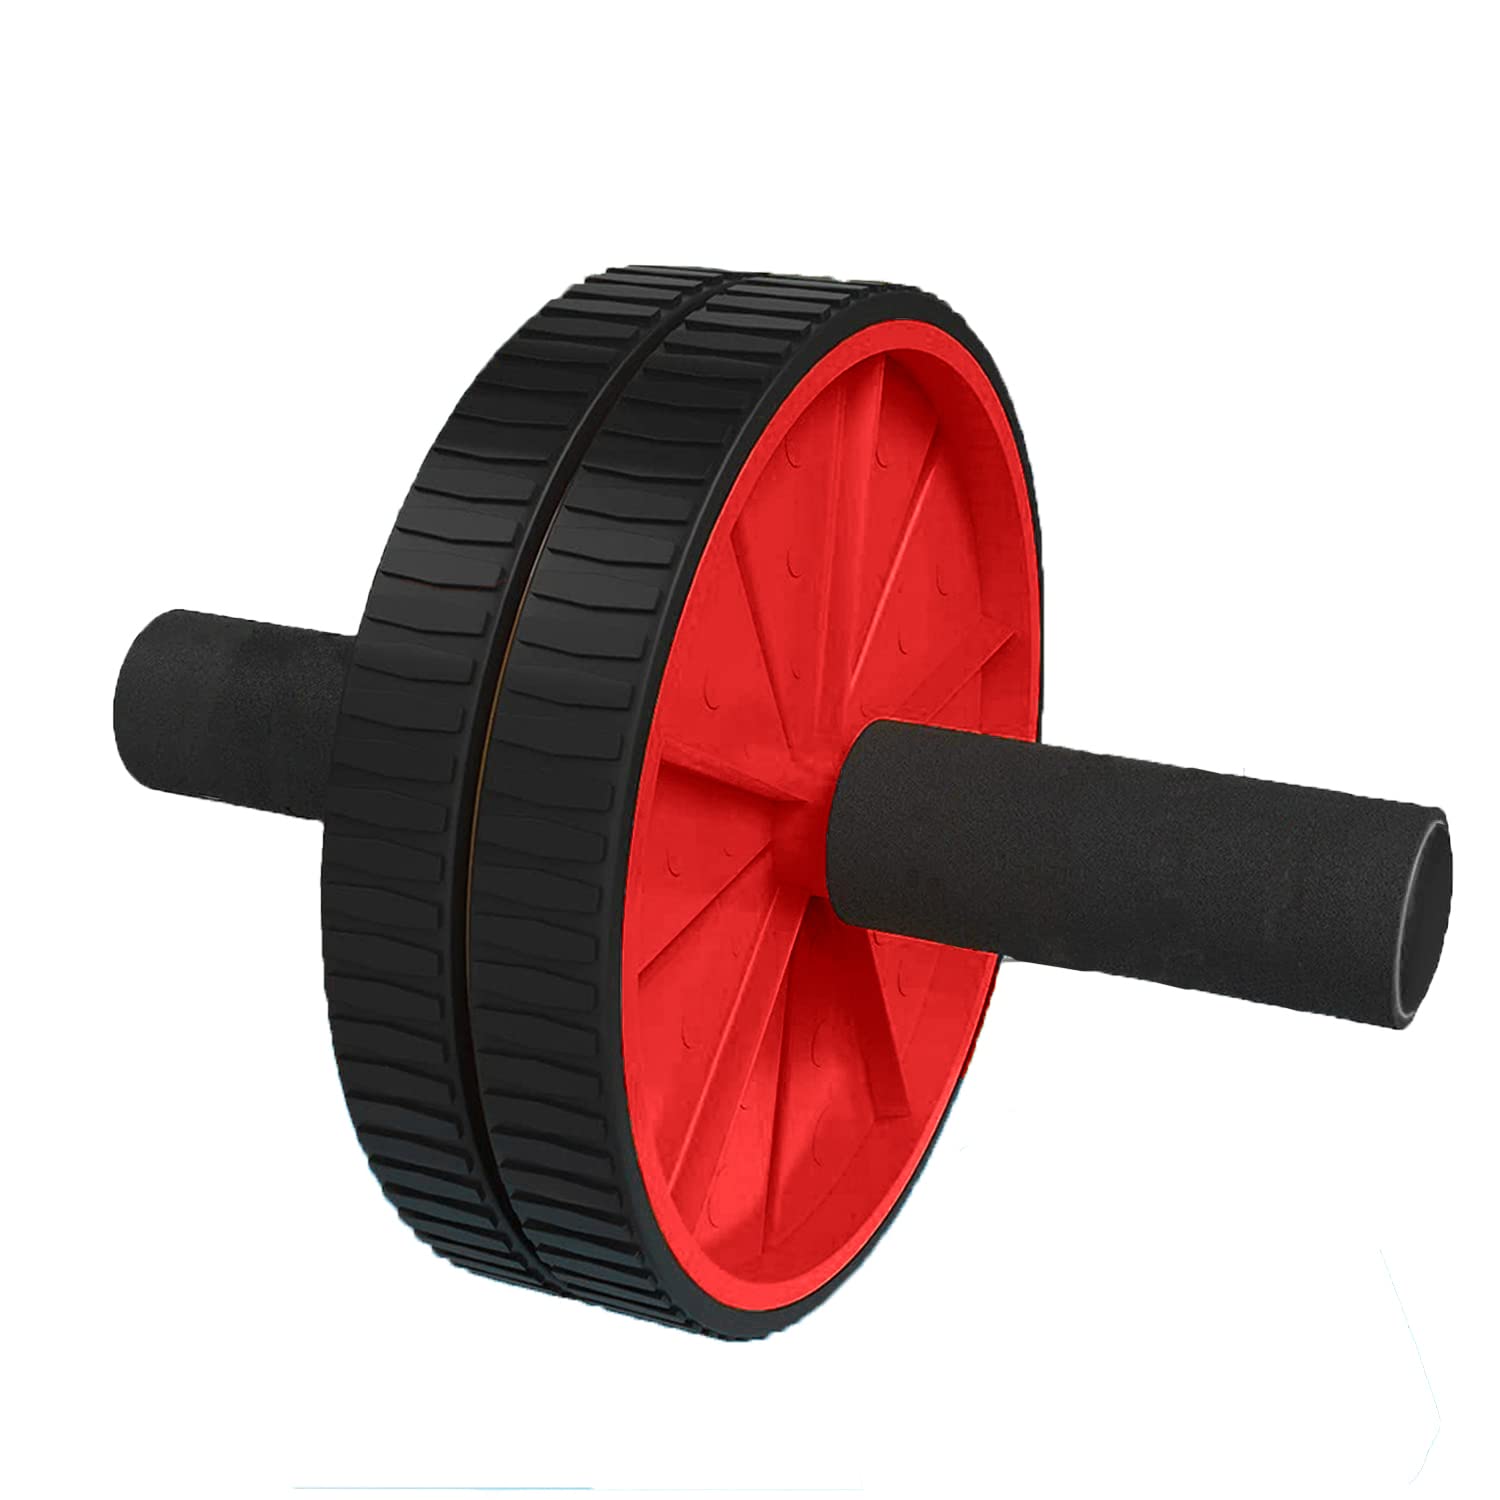 Strauss Premium Exercise Wheel Ab Roller with Foam Handles, (Red)